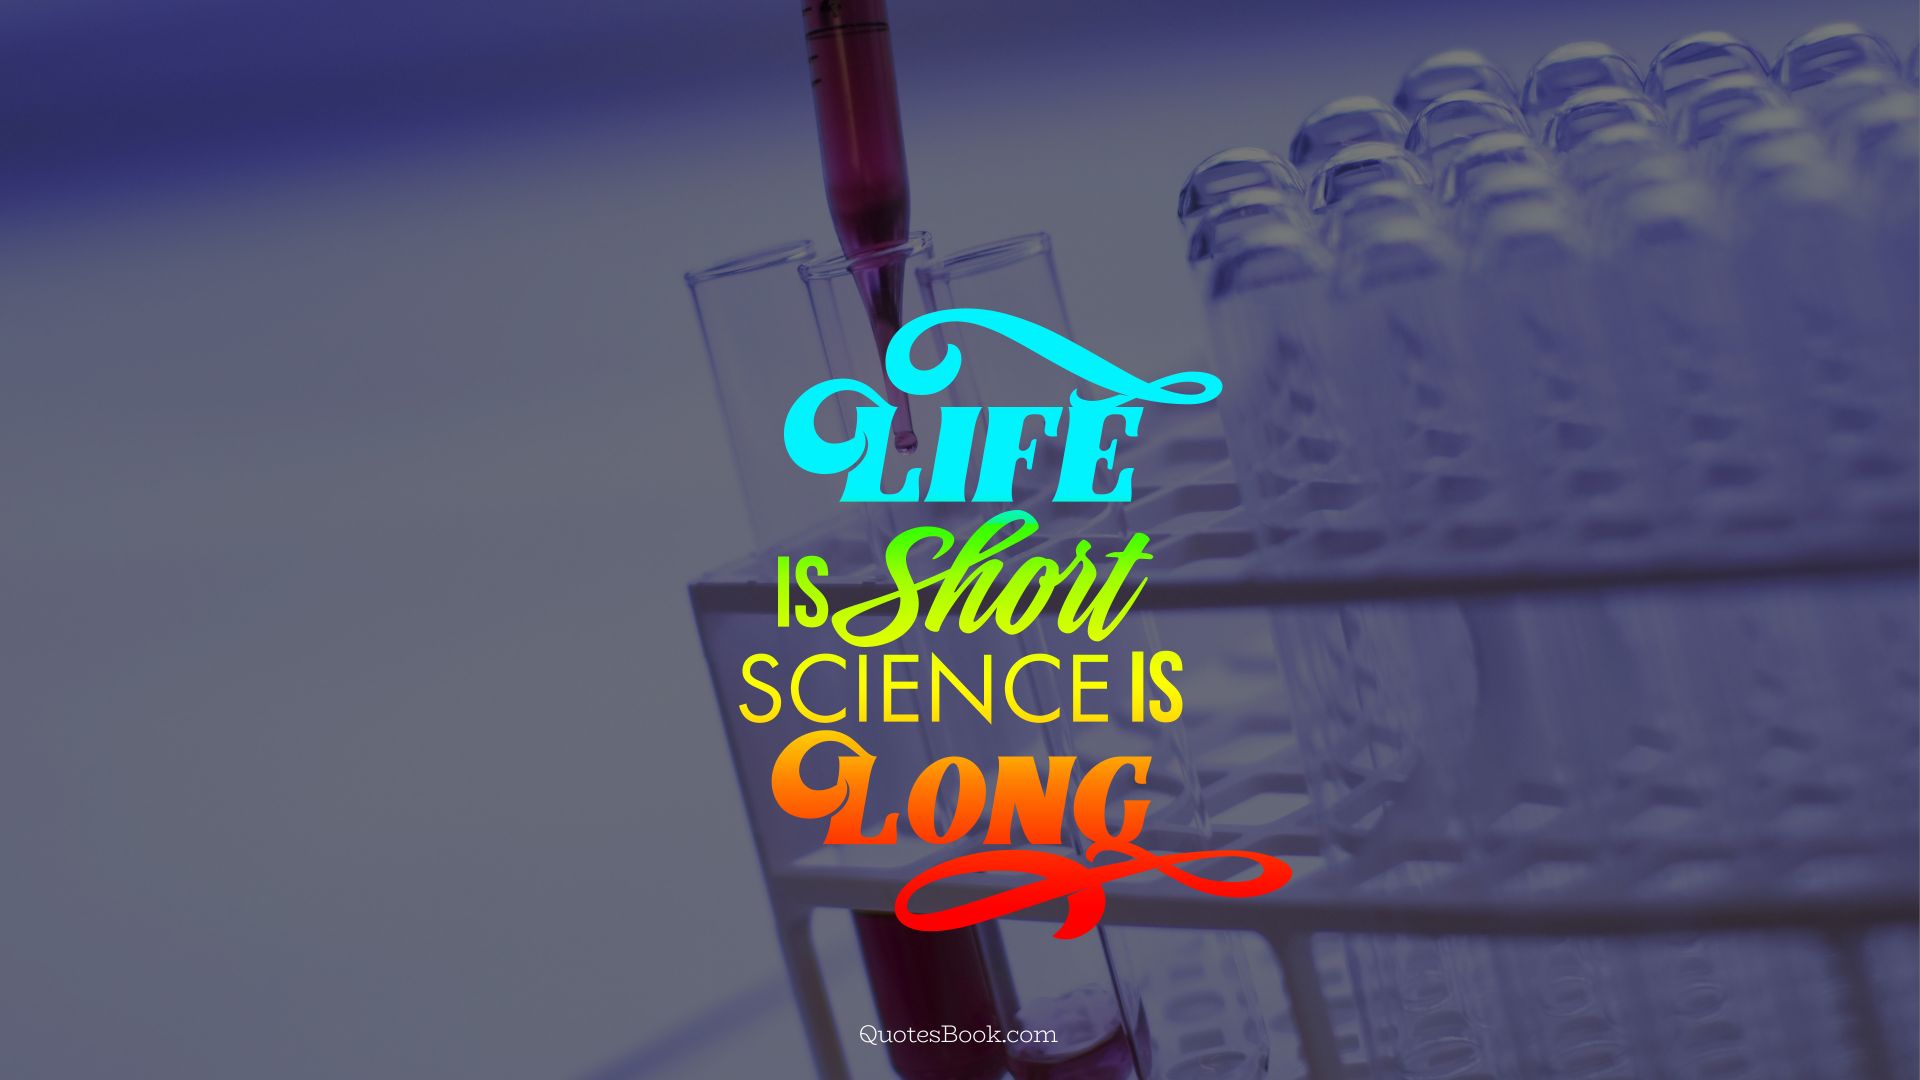 Life is short science is long